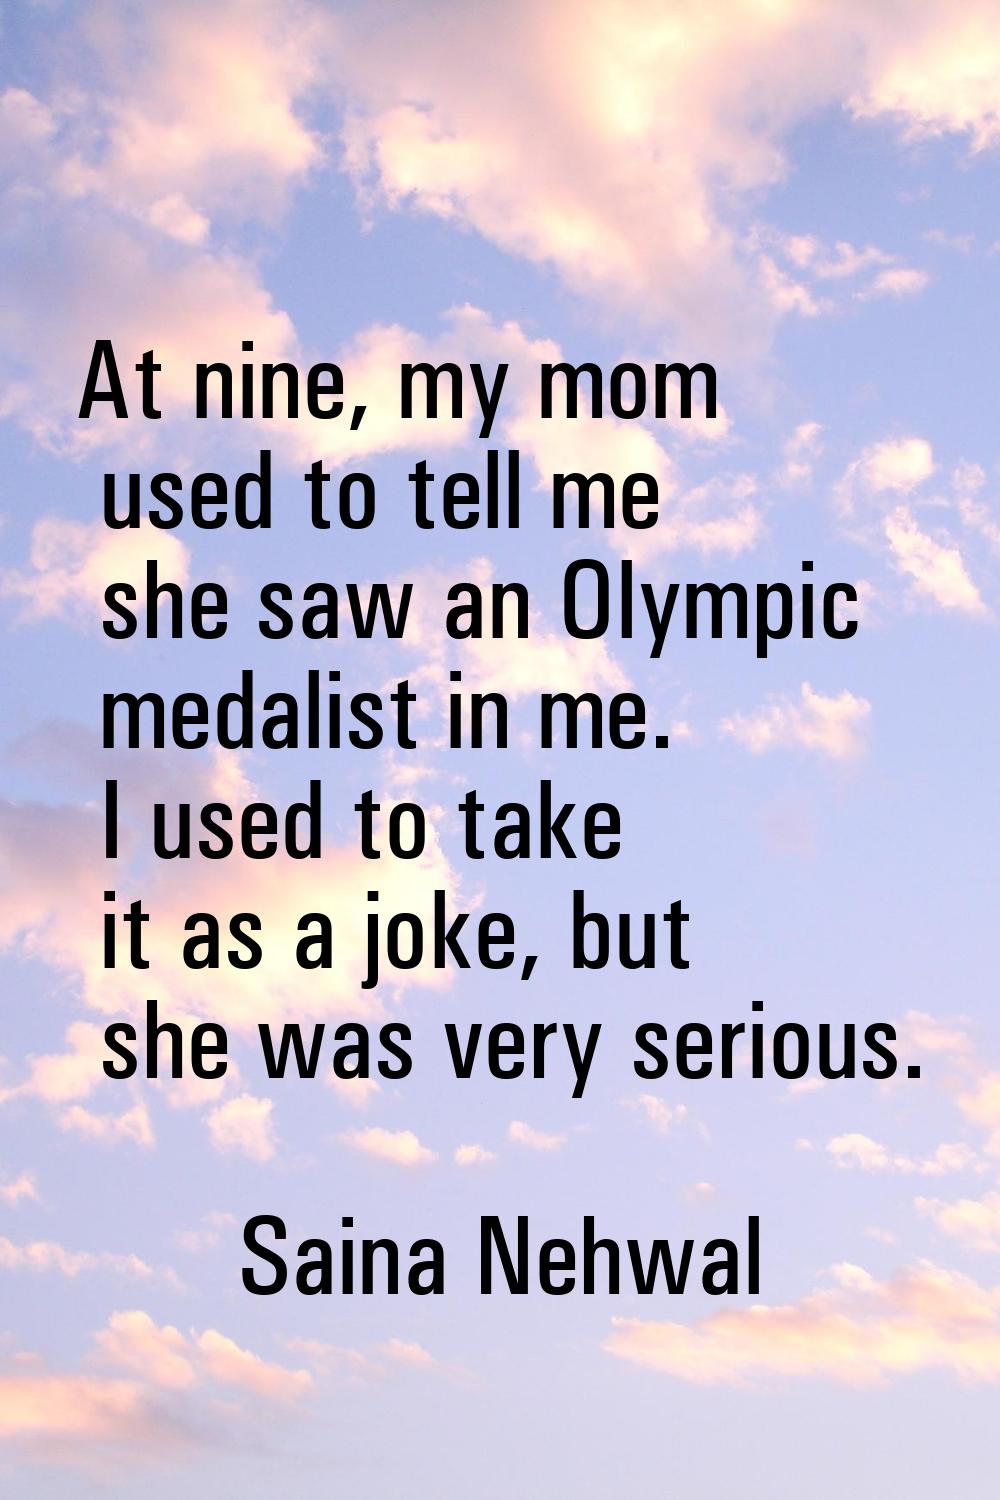 At nine, my mom used to tell me she saw an Olympic medalist in me. I used to take it as a joke, but